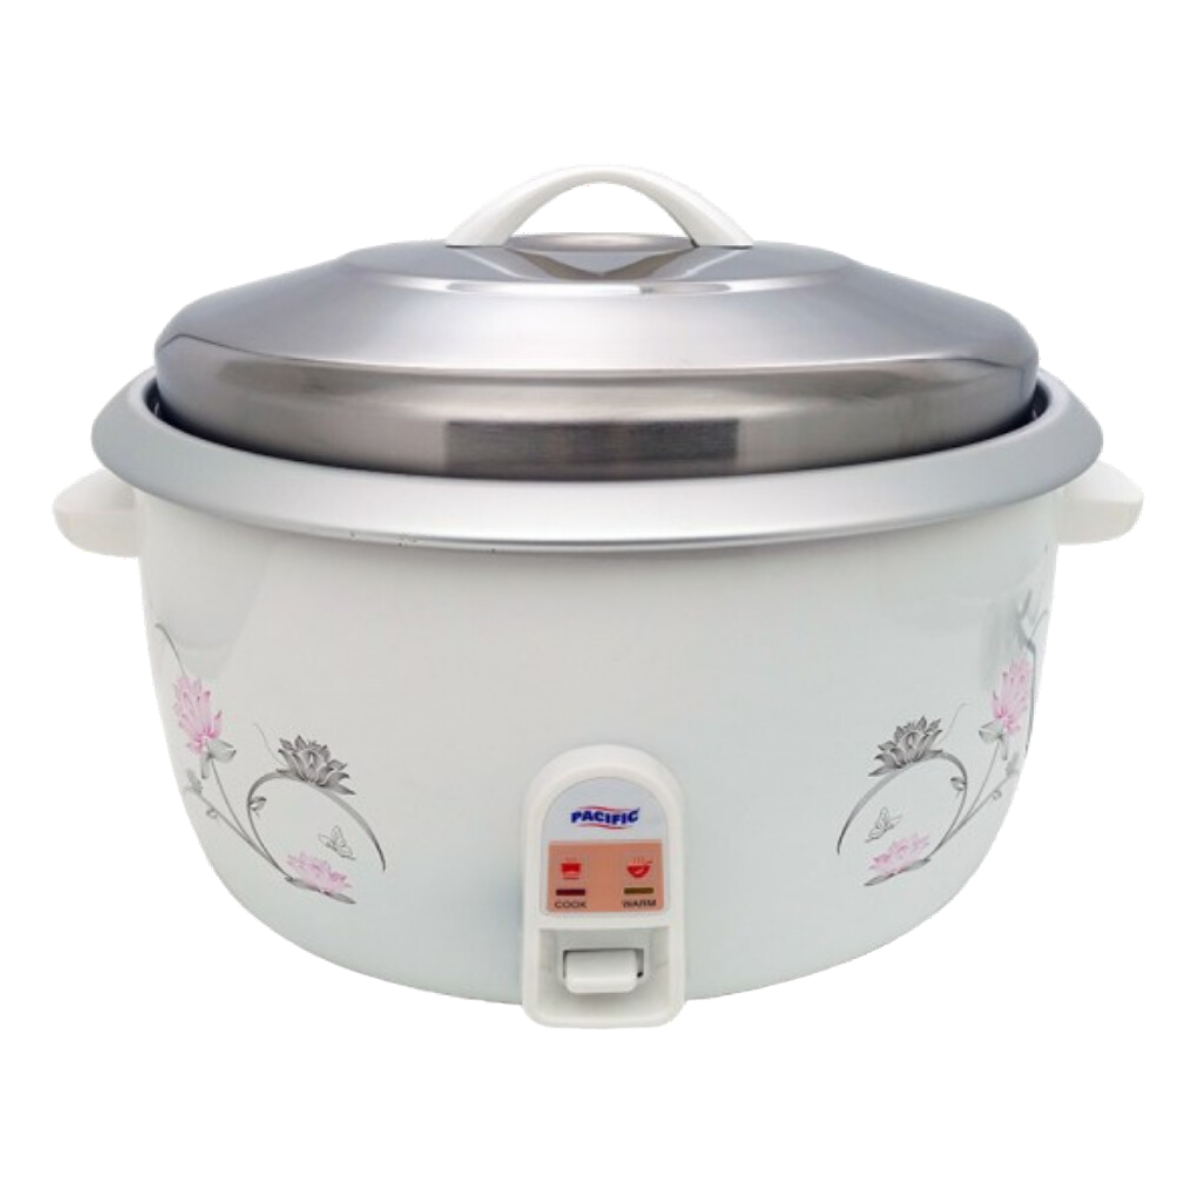 PACIFIC PCK1000 RICE COOKER 10L